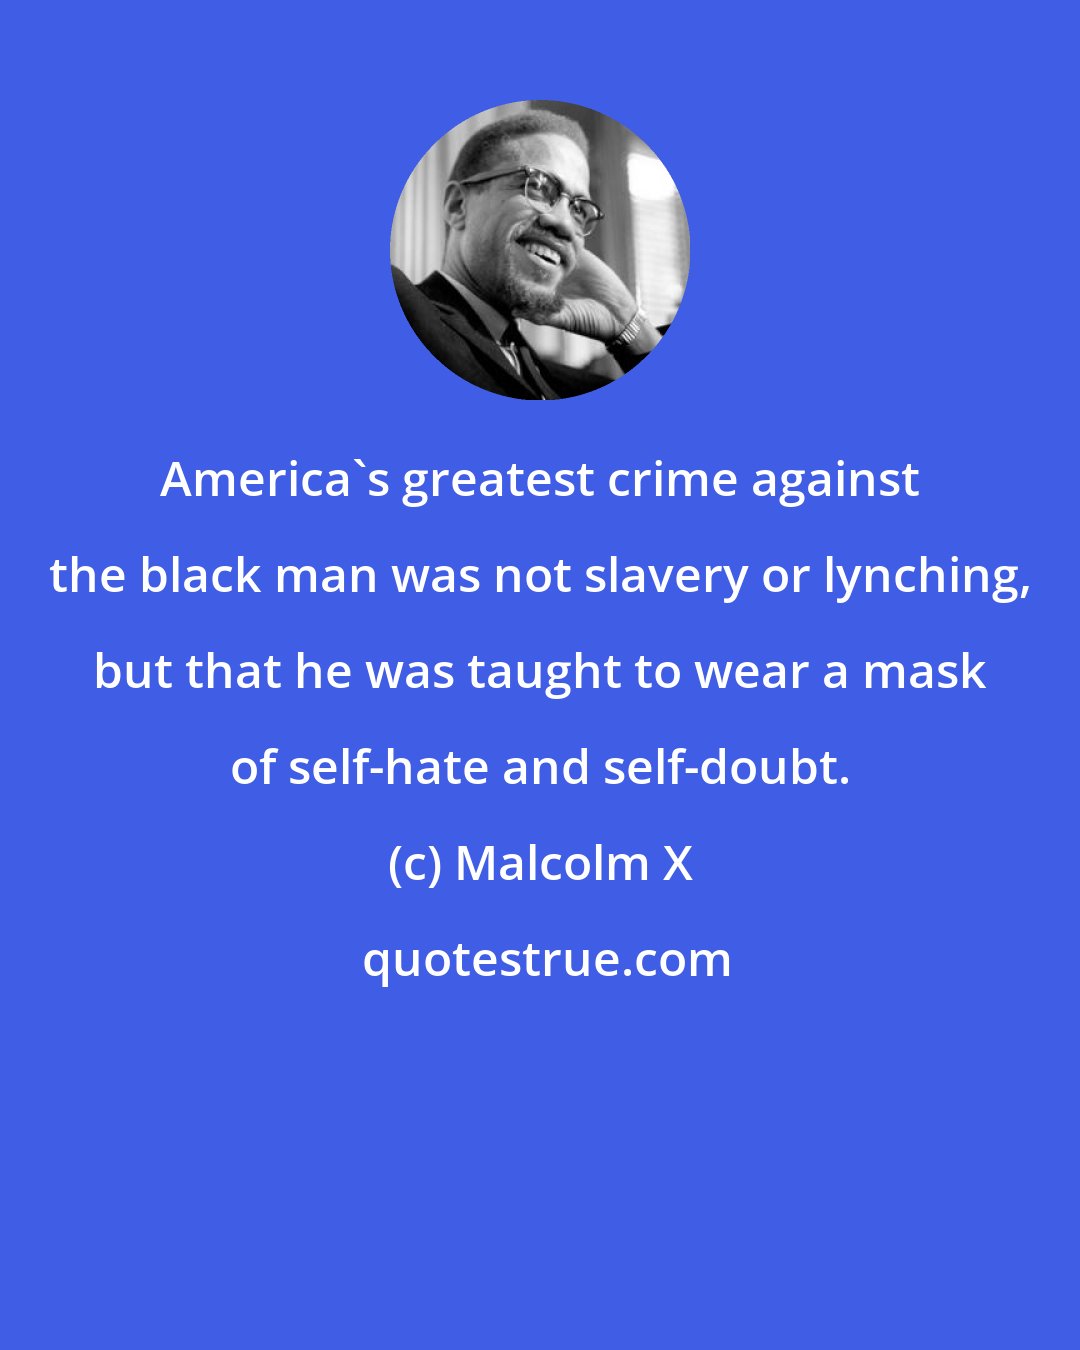 Malcolm X: America's greatest crime against the black man was not slavery or lynching, but that he was taught to wear a mask of self-hate and self-doubt.